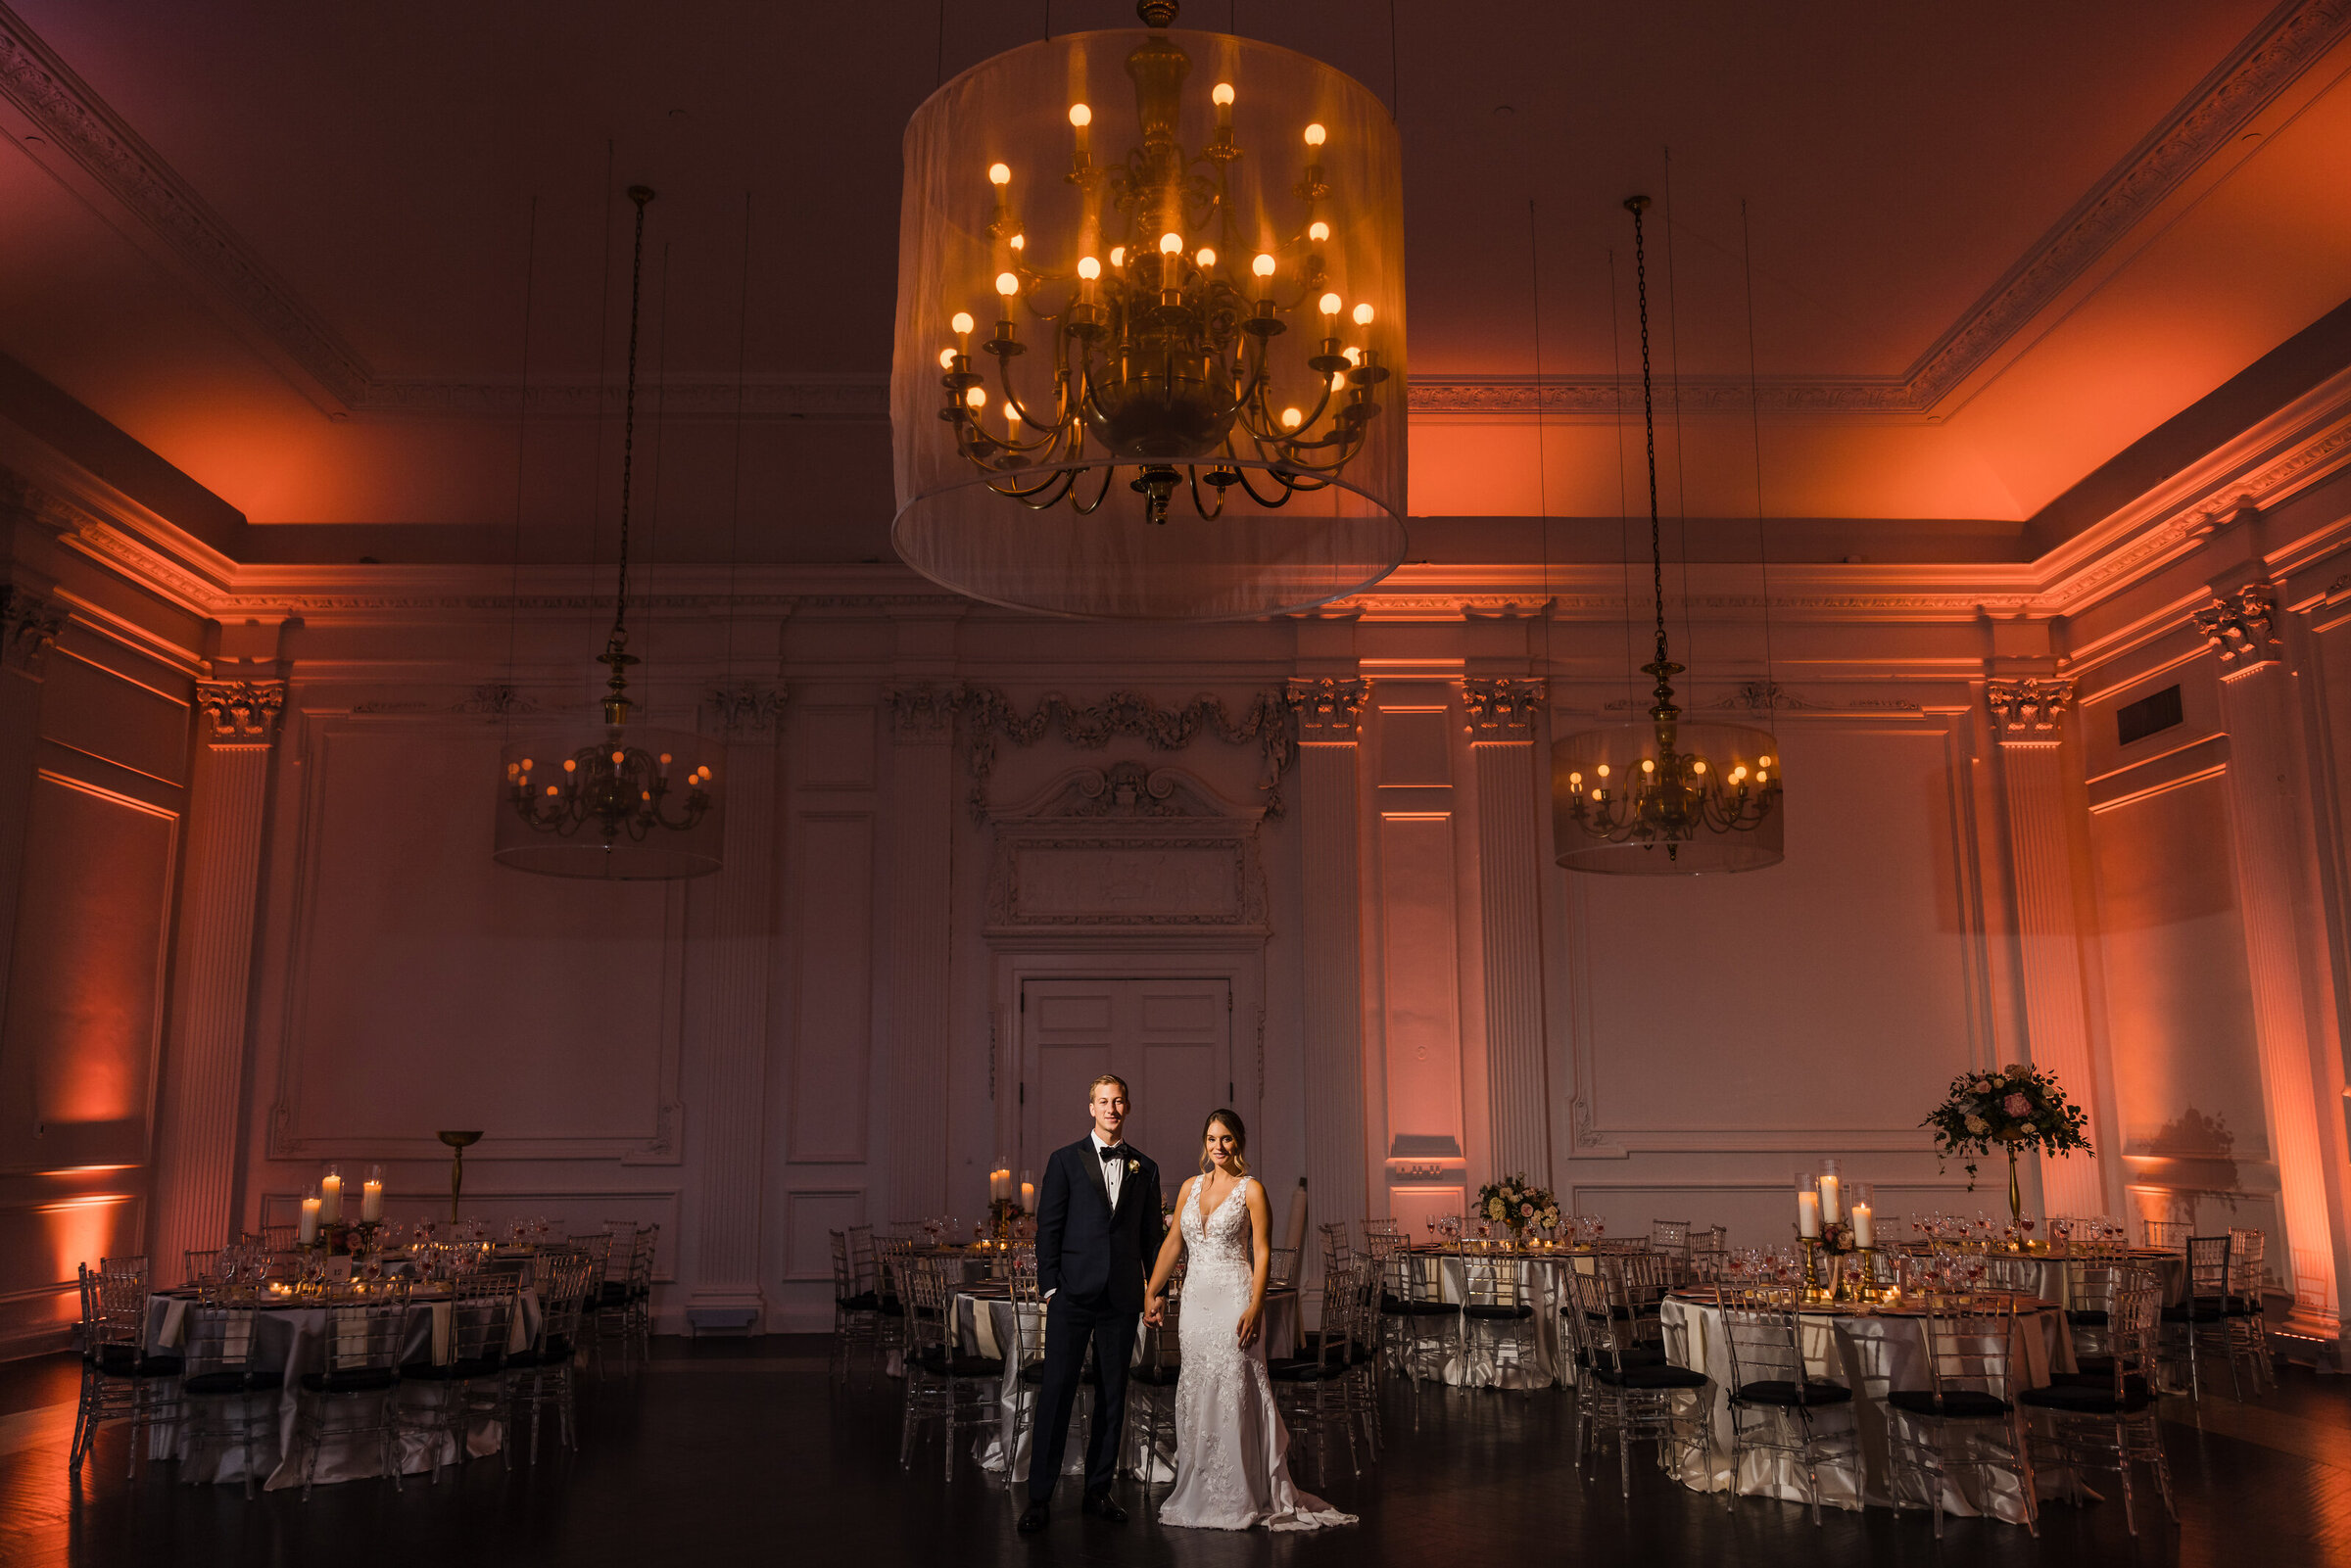 Wide angle of the Down Town Club ballroom with bride and groom standing in the middle holding hands captured by Anastasia Romanova